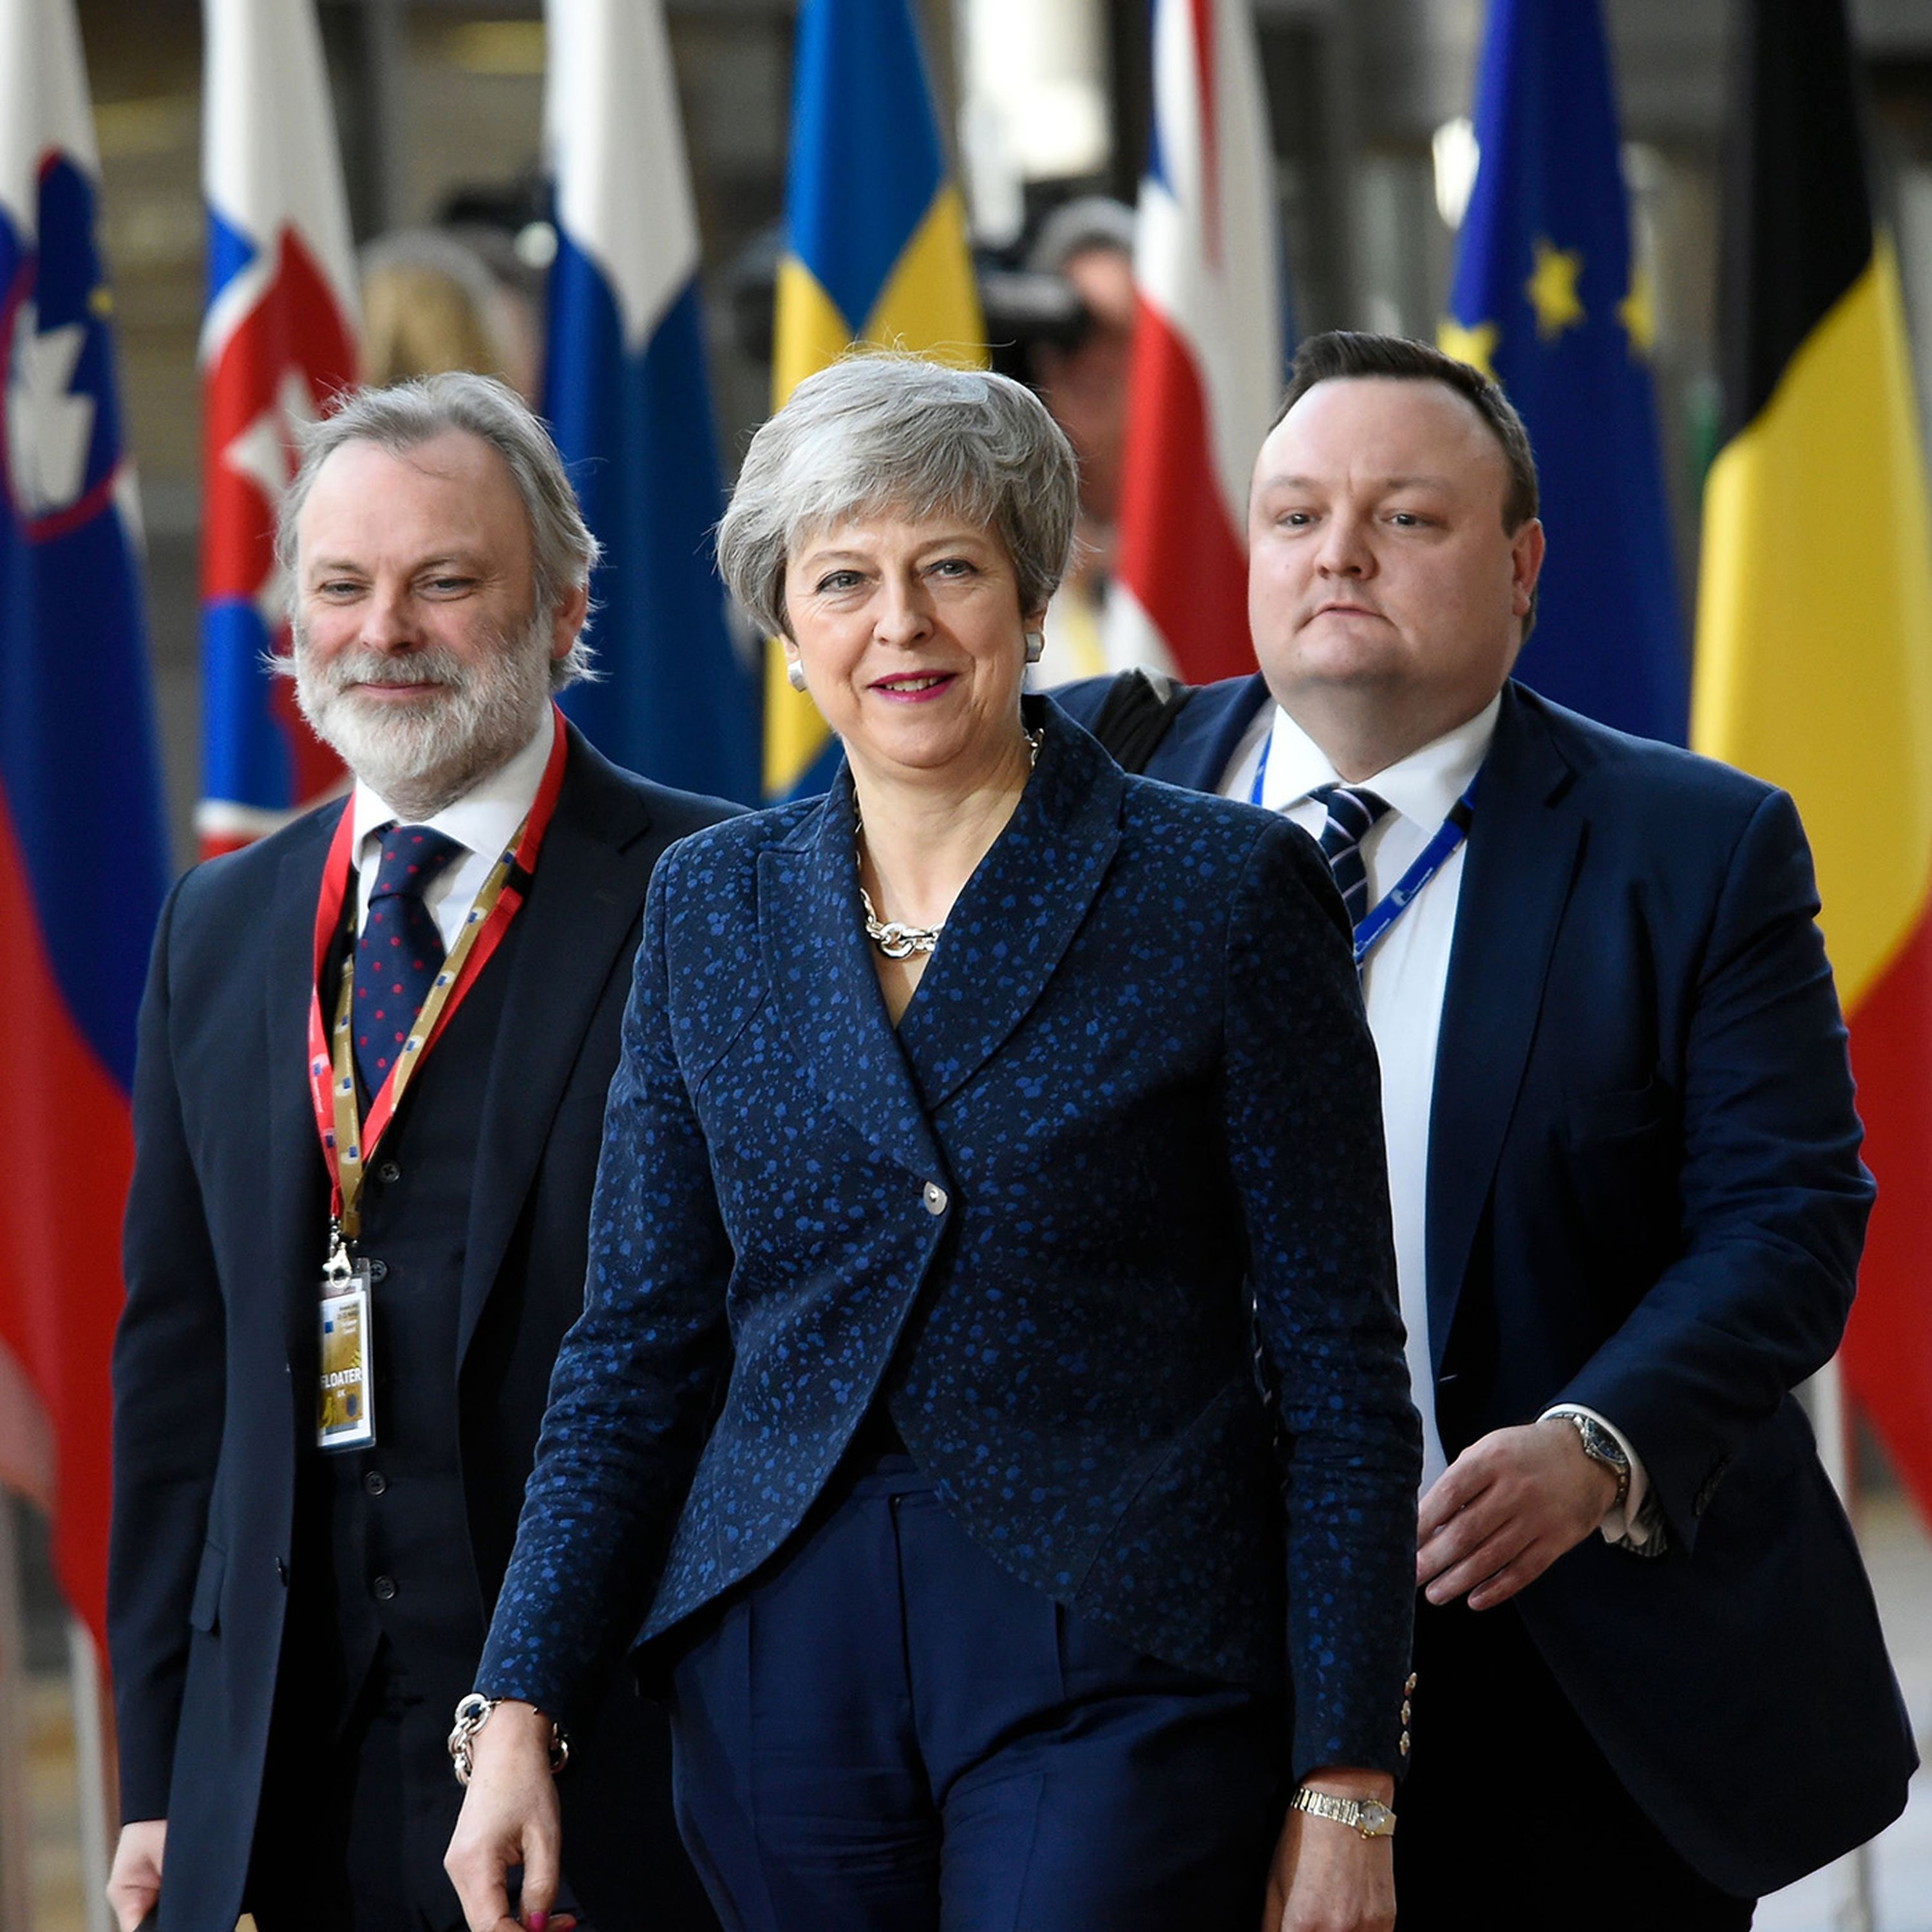 Relief all round as EU leaders offer reprieve on Brexit